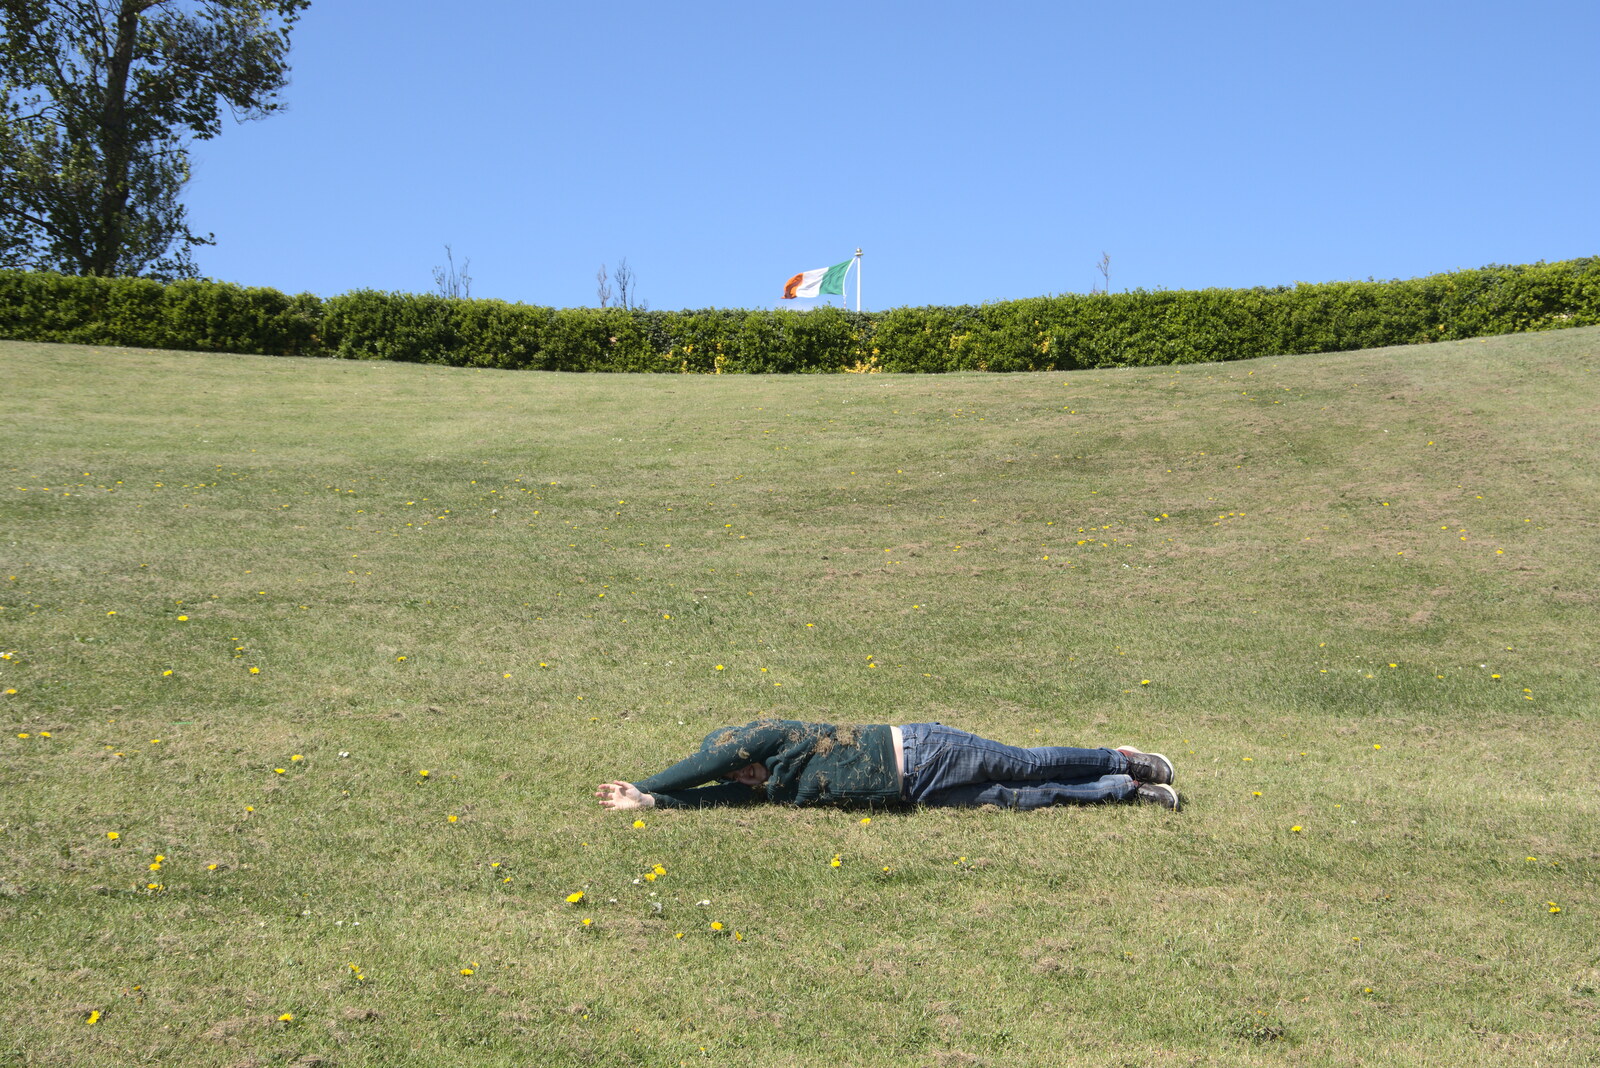 Blackrock North and South, Louth and County Dublin, Ireland - 23rd April 2022: Fred gets grassy rolling down a hill